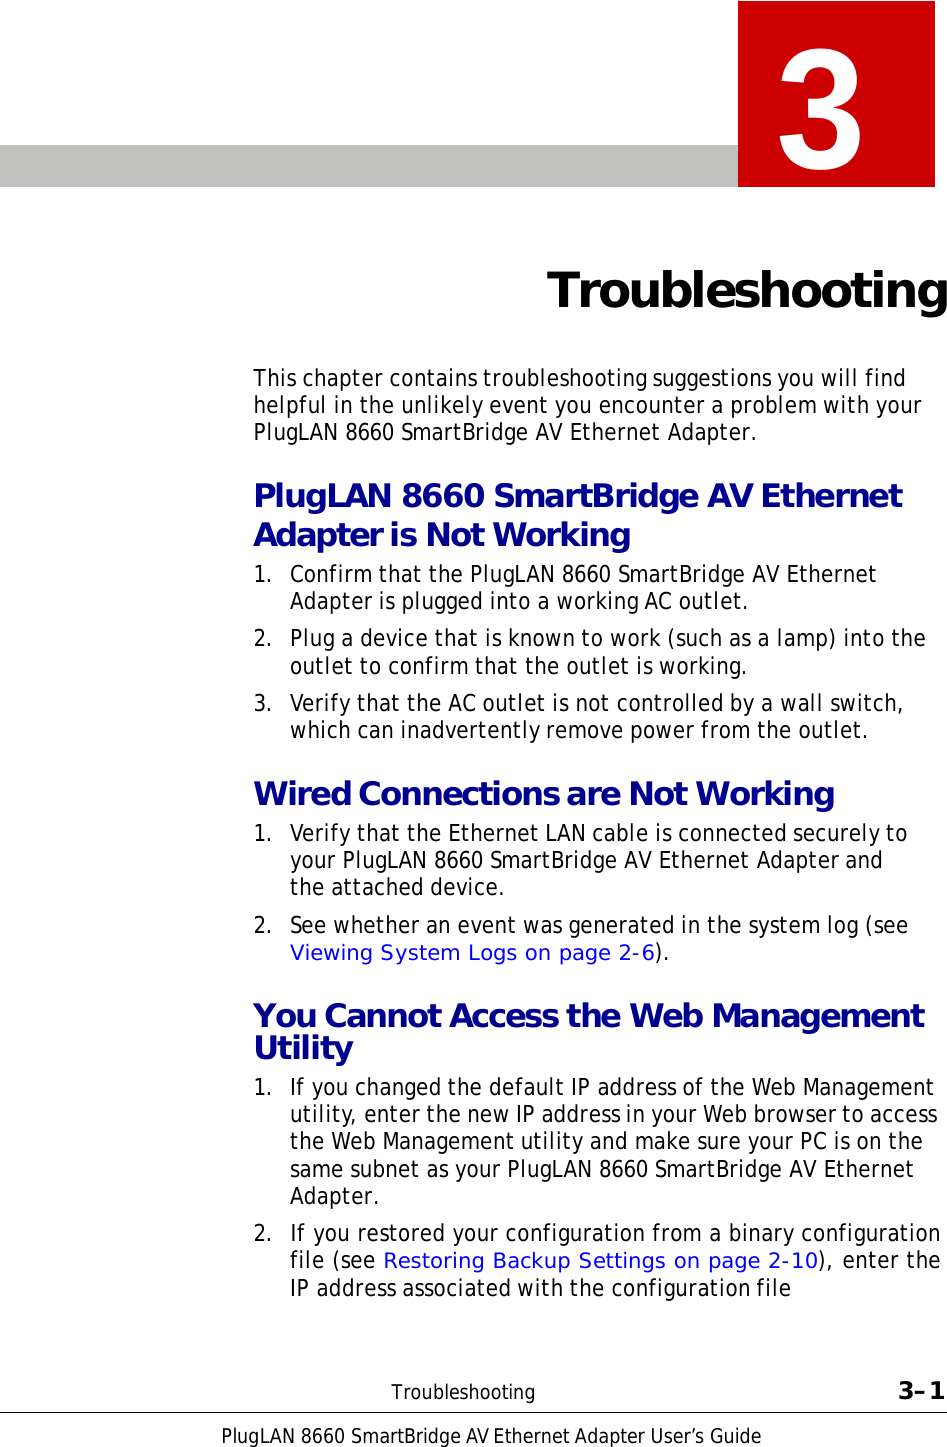 PlugLAN 8660 SmartBridge AV Ethernet Adapter User’s Guide    3   Troubleshooting   This chapter contains troubleshooting suggestions you will find helpful in the unlikely event you encounter a problem with your PlugLAN 8660 SmartBridge AV Ethernet Adapter.  PlugLAN 8660 SmartBridge AV Ethernet Adapter is Not Working 1.  Confirm that the PlugLAN 8660 SmartBridge AV Ethernet Adapter is plugged into a working AC outlet. 2.  Plug a device that is known to work (such as a lamp) into the outlet to confirm that the outlet is working.  3.  Verify that the AC outlet is not controlled by a wall switch, which can inadvertently remove power from the outlet.  Wired Connections are Not Working 1.  Verify that the Ethernet LAN cable is connected securely to your PlugLAN 8660 SmartBridge AV Ethernet Adapter and the attached device.  2.  See whether an event was generated in the system log (see Viewing System Logs on page 2-6).  You Cannot Access the Web Management Utility 1.  If you changed the default IP address of the Web Management utility, enter the new IP address in your Web browser to access the Web Management utility and make sure your PC is on the same subnet as your PlugLAN 8660 SmartBridge AV Ethernet Adapter. 2.  If you restored your configuration from a binary configuration file (see Restoring Backup Settings on page 2-10), enter the IP address associated with the configuration file    Troubleshooting  3–1 